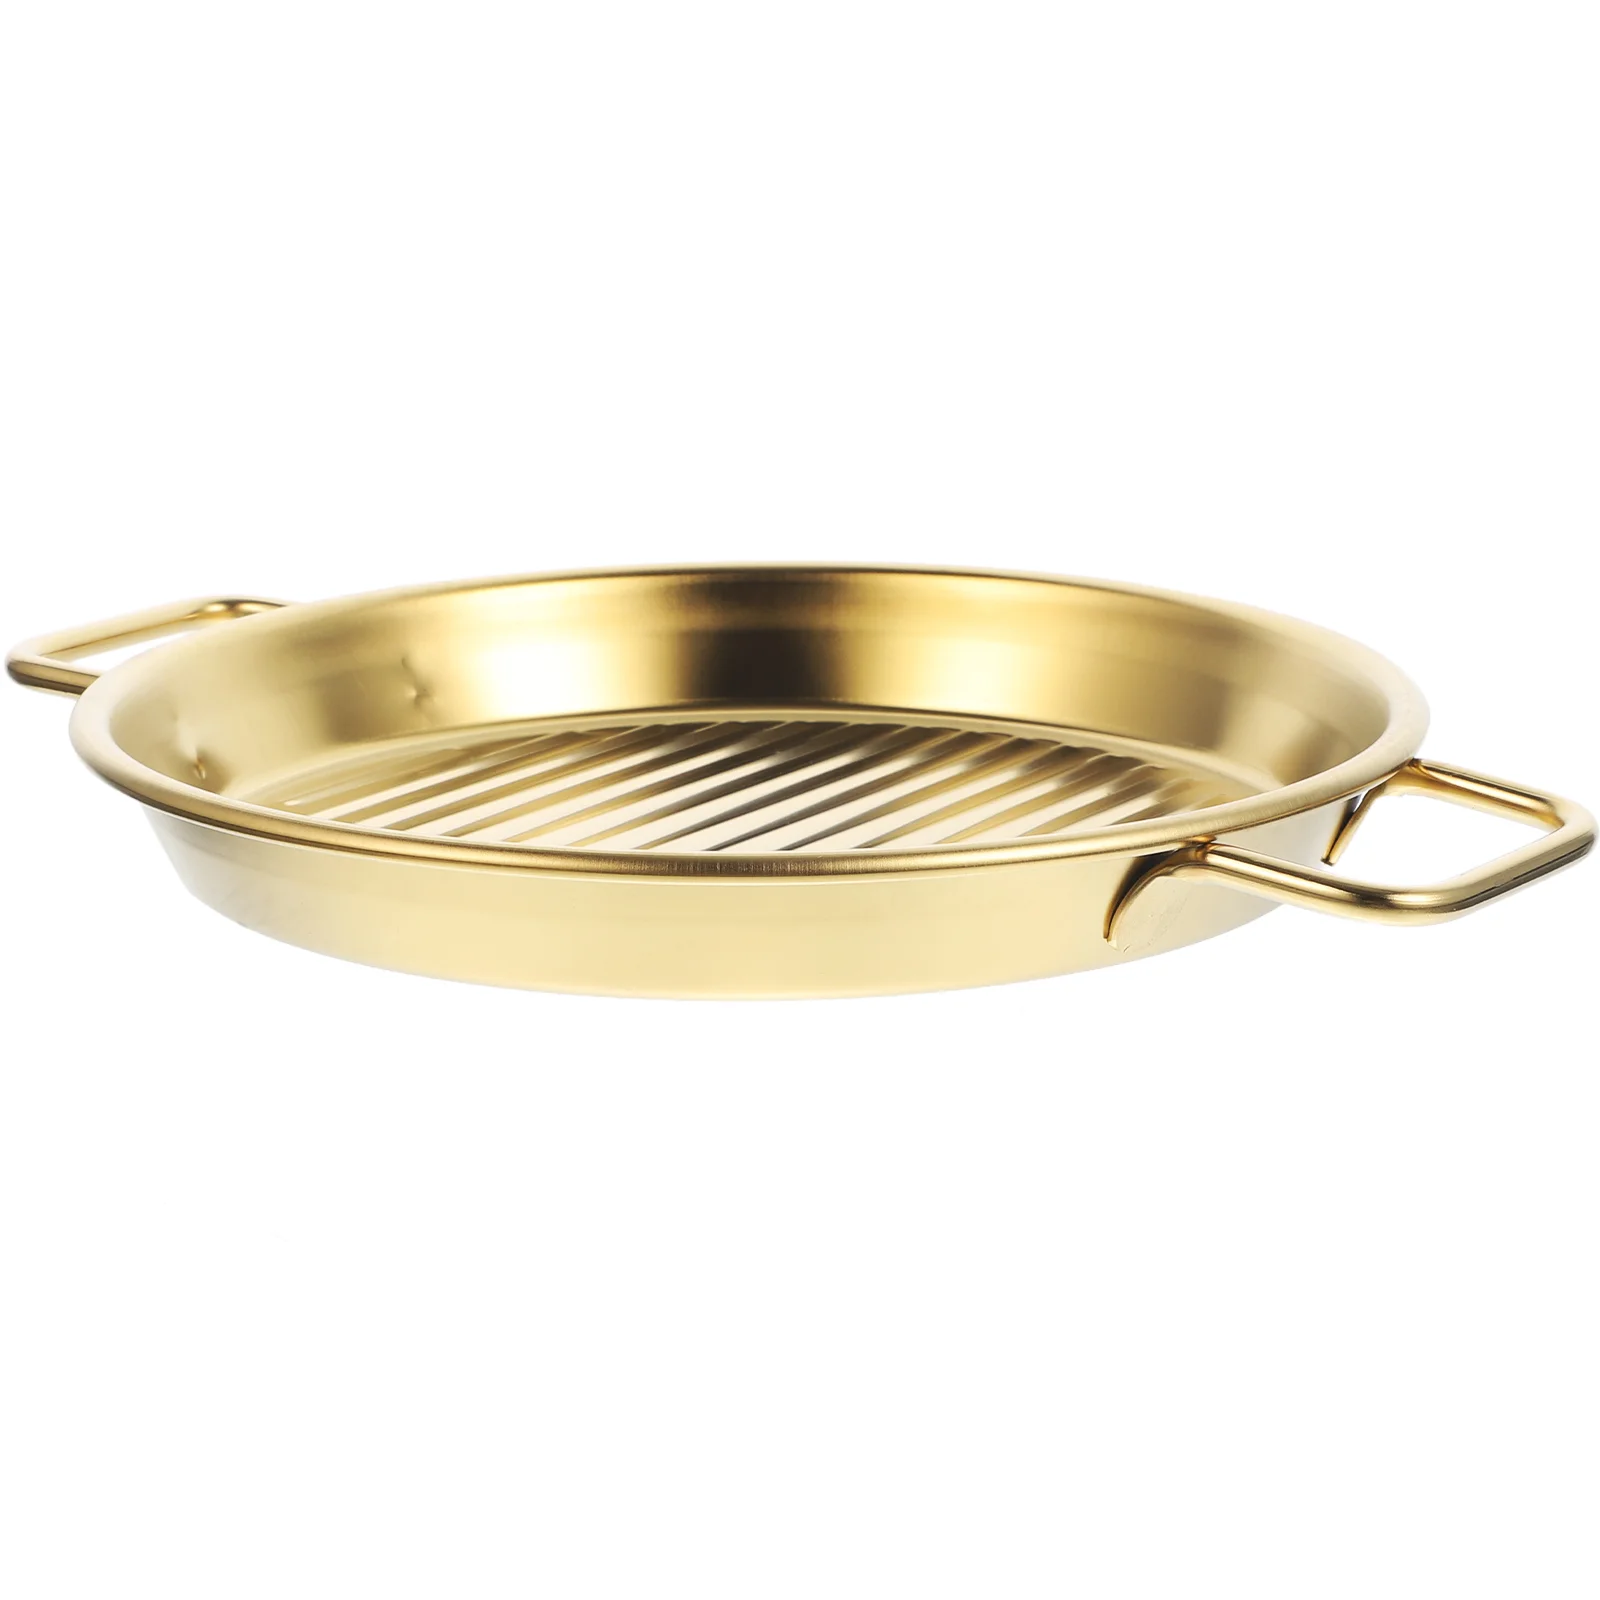 

Stainless Steel Drain Pan Fried Chicken Tray Metal Snack Plate Food Serving Handles Container